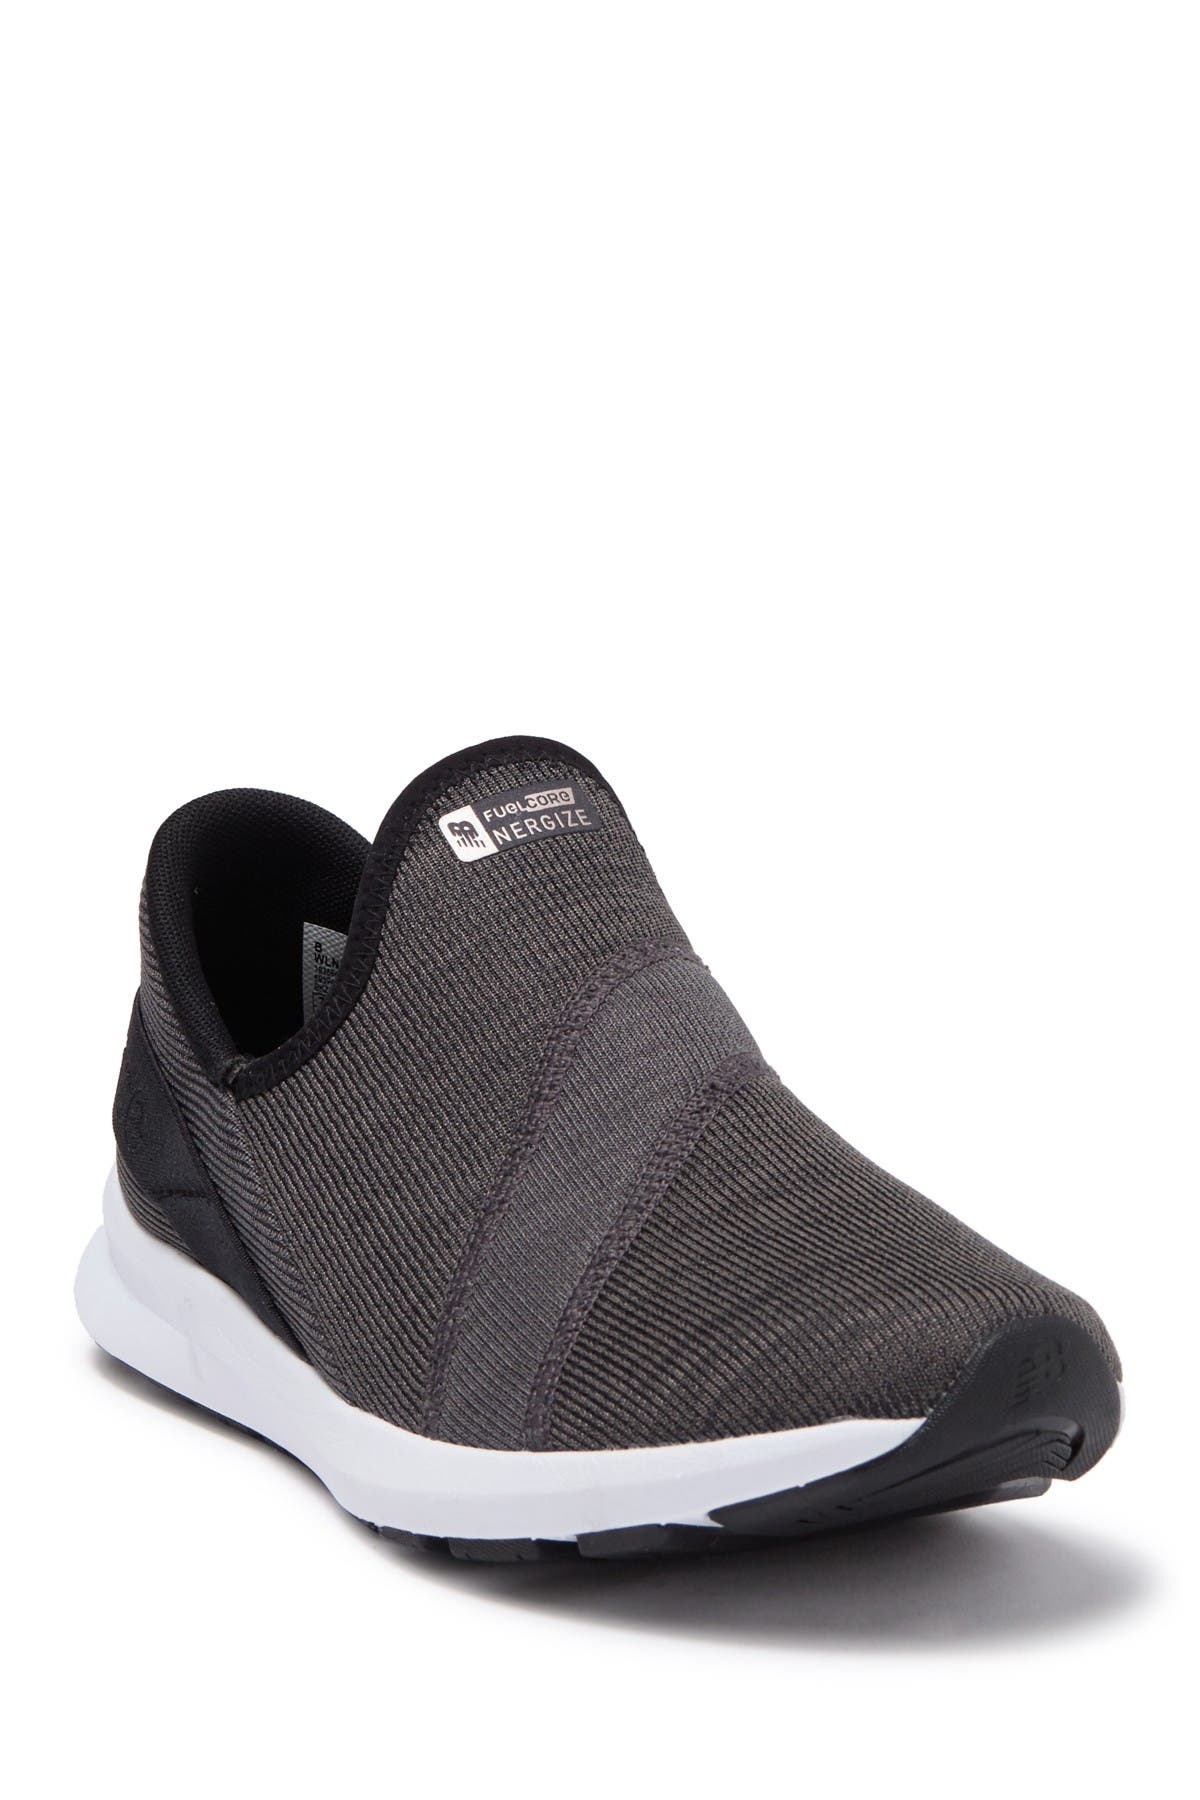 new balance fuelcore nergize mens